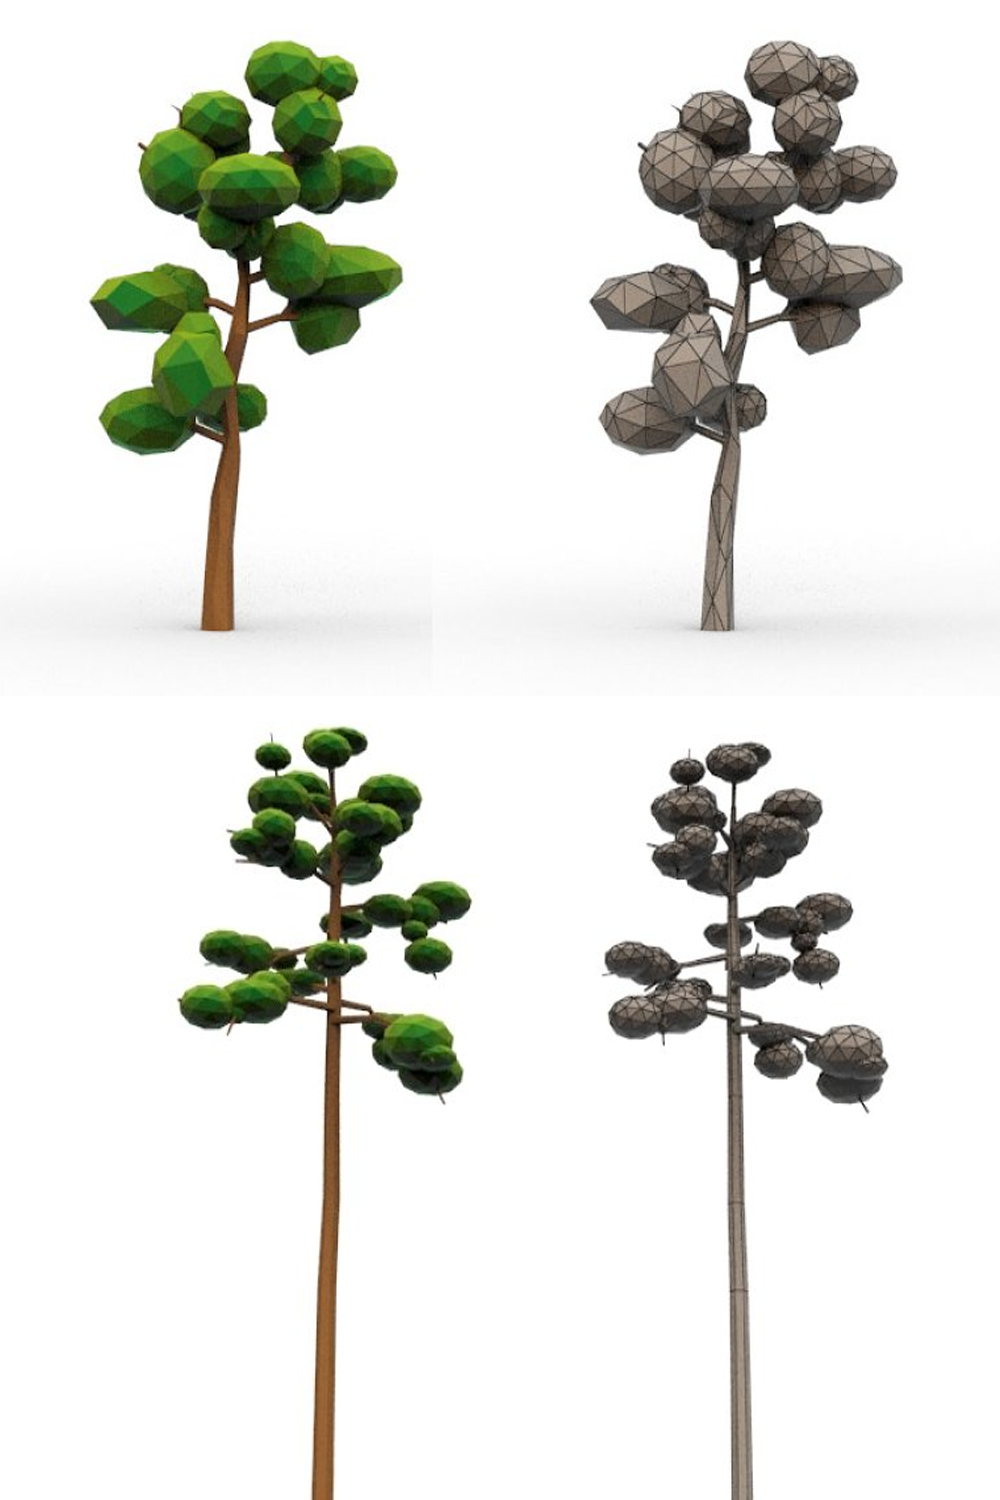 Illustrations preview low poly cartoon tree of pinterest.